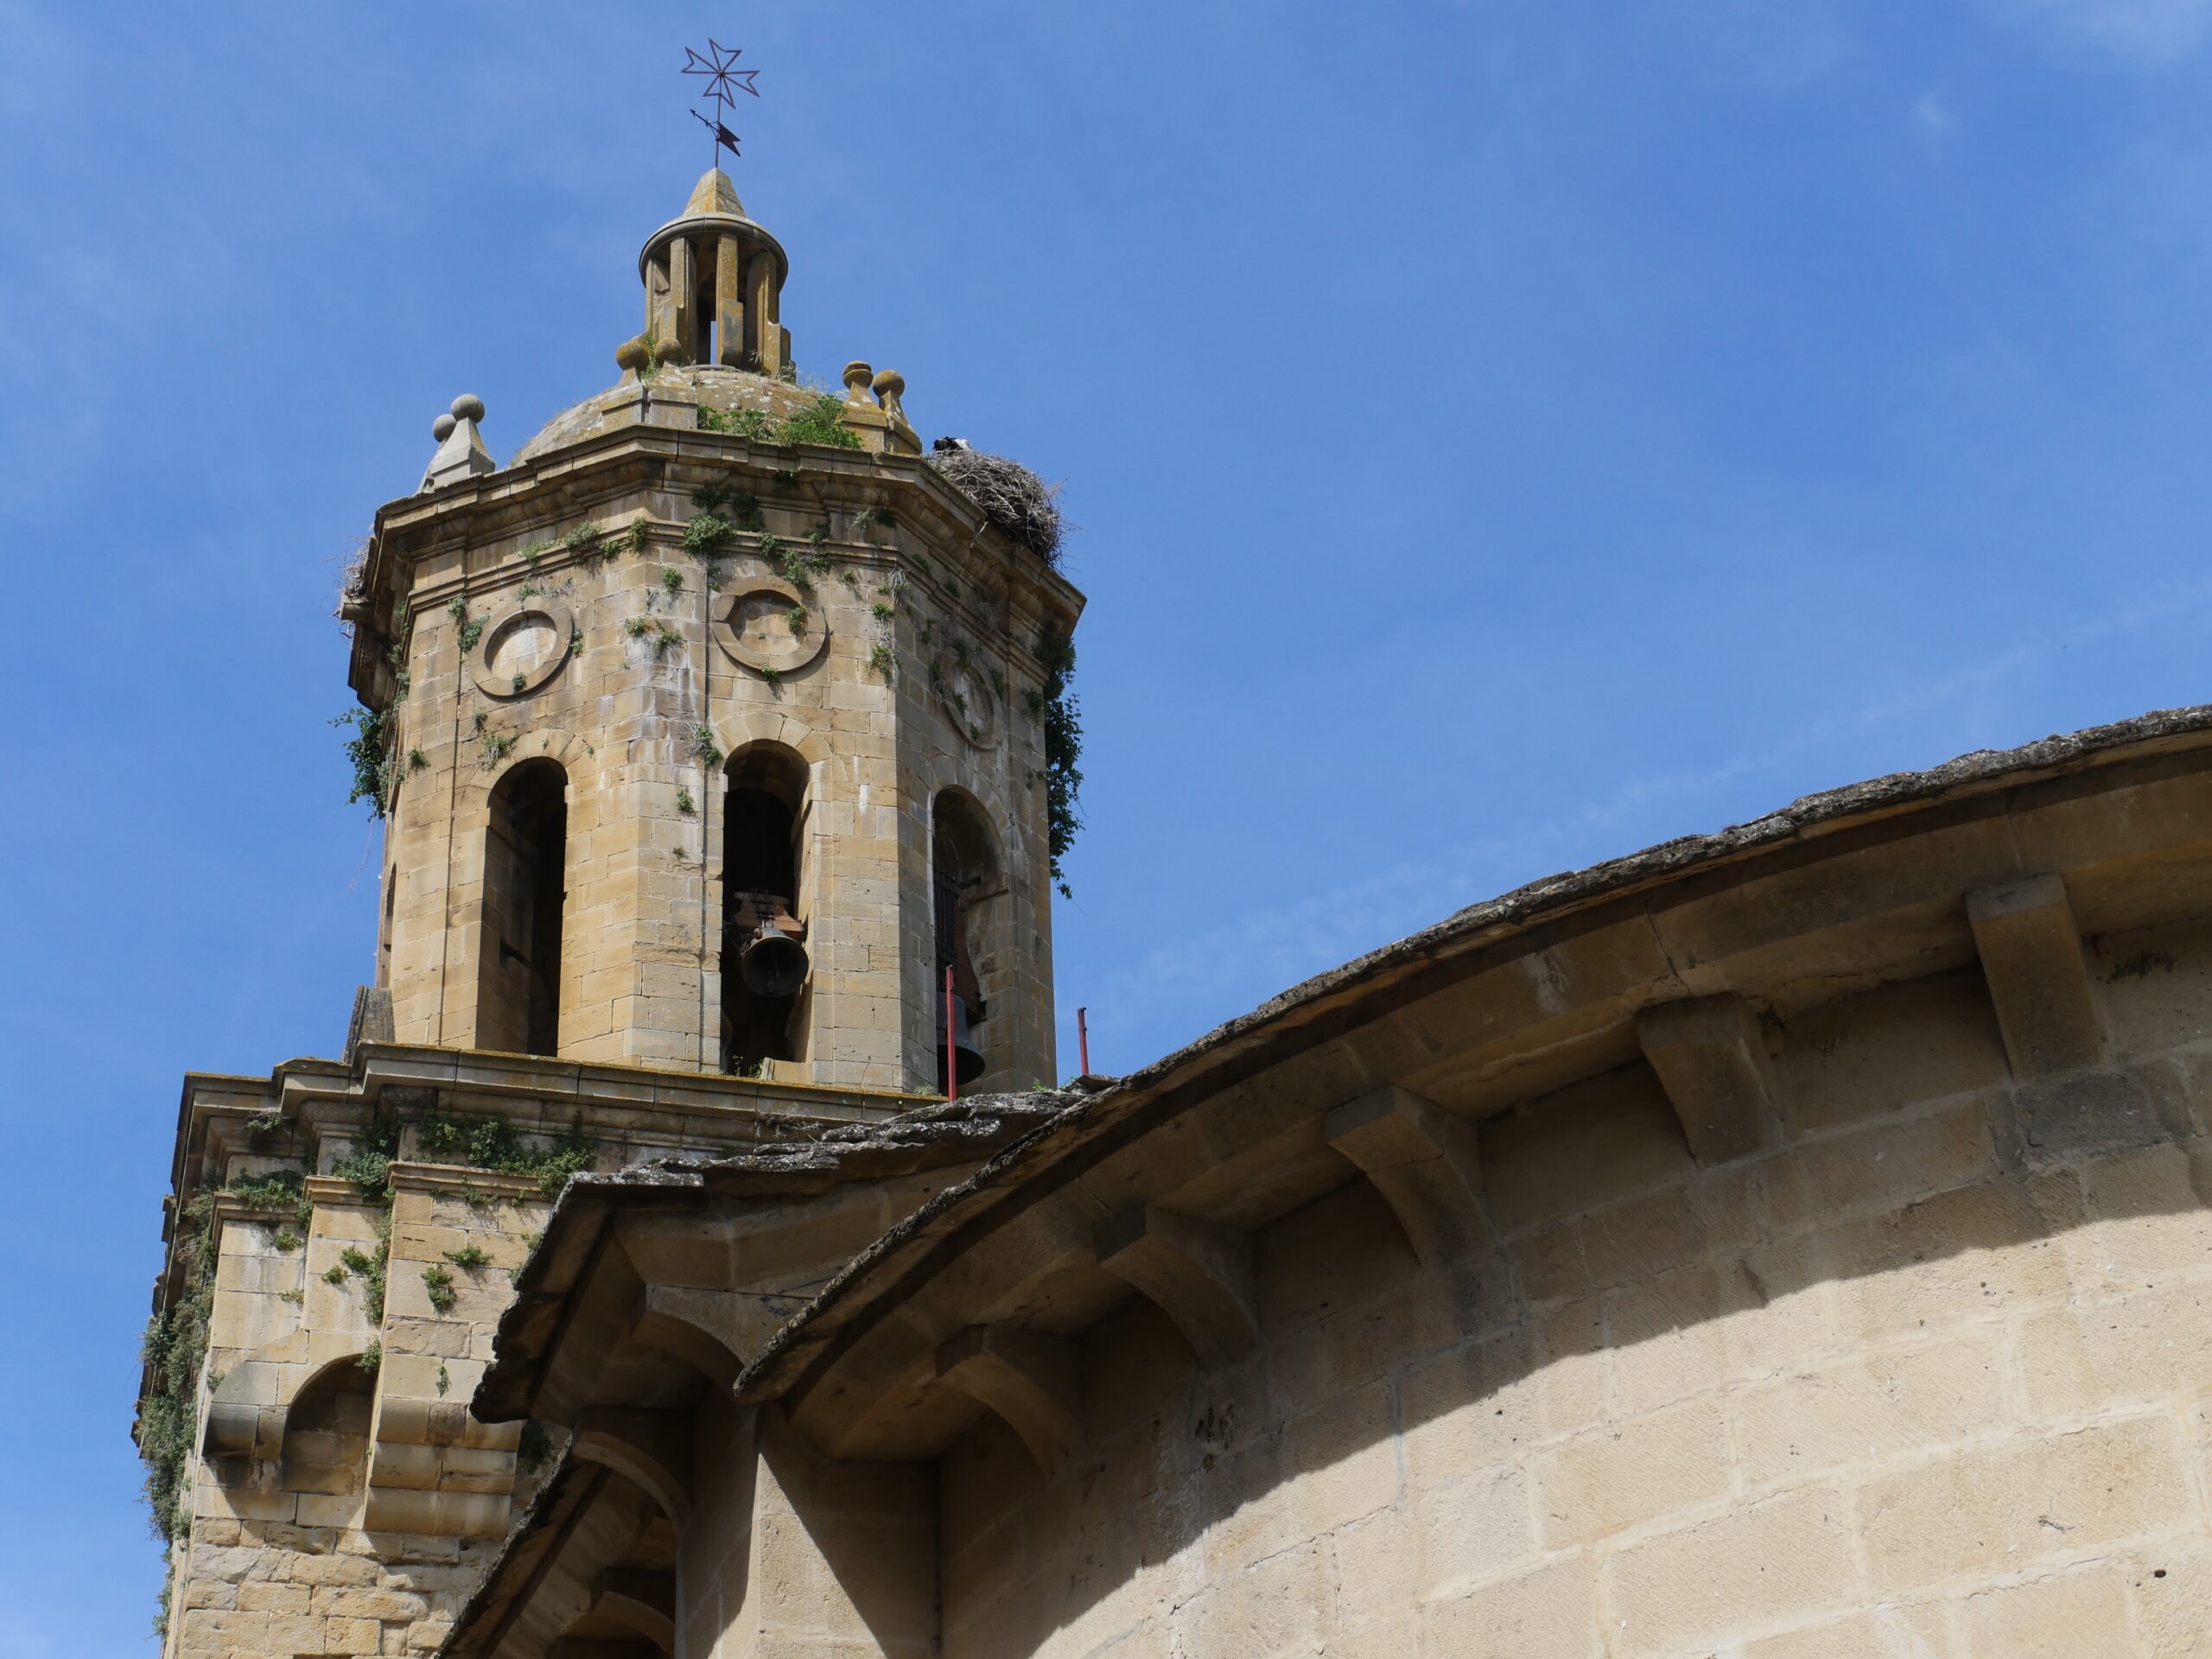 The El Crucifijo Church in Puente la Reina, Spain has a large bell tower.